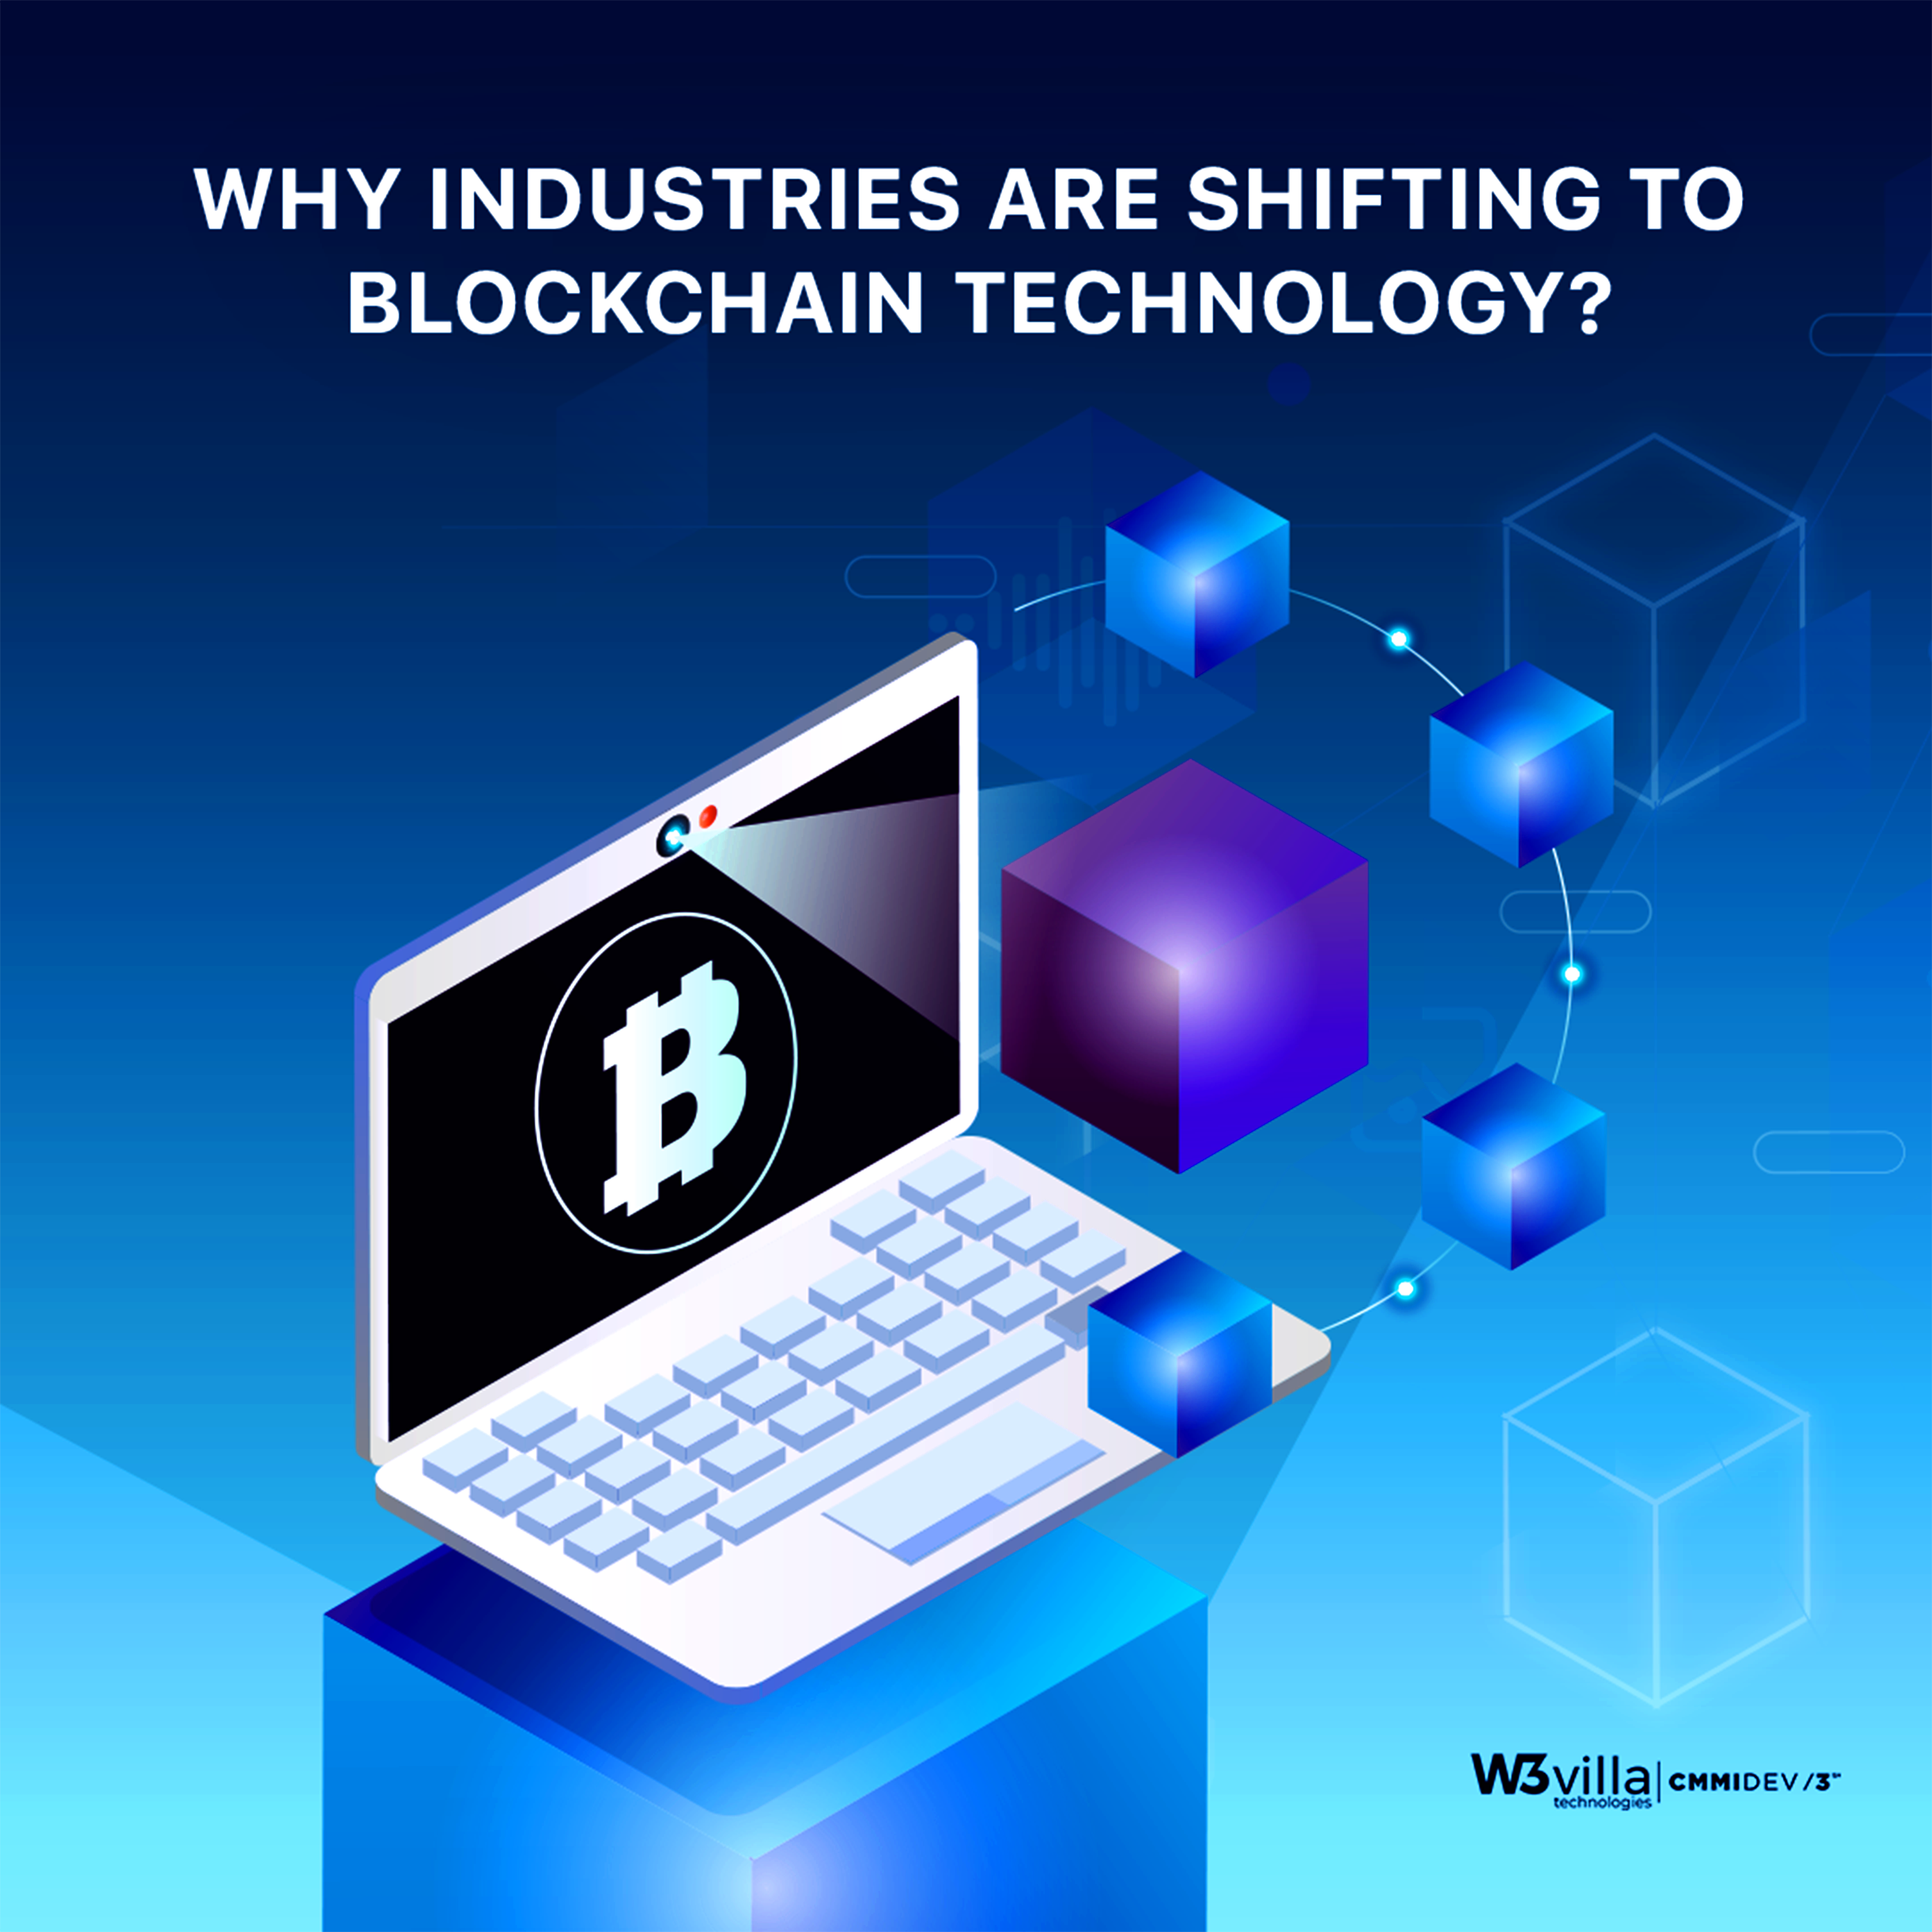 Why industries are shifting to blockchain technology?